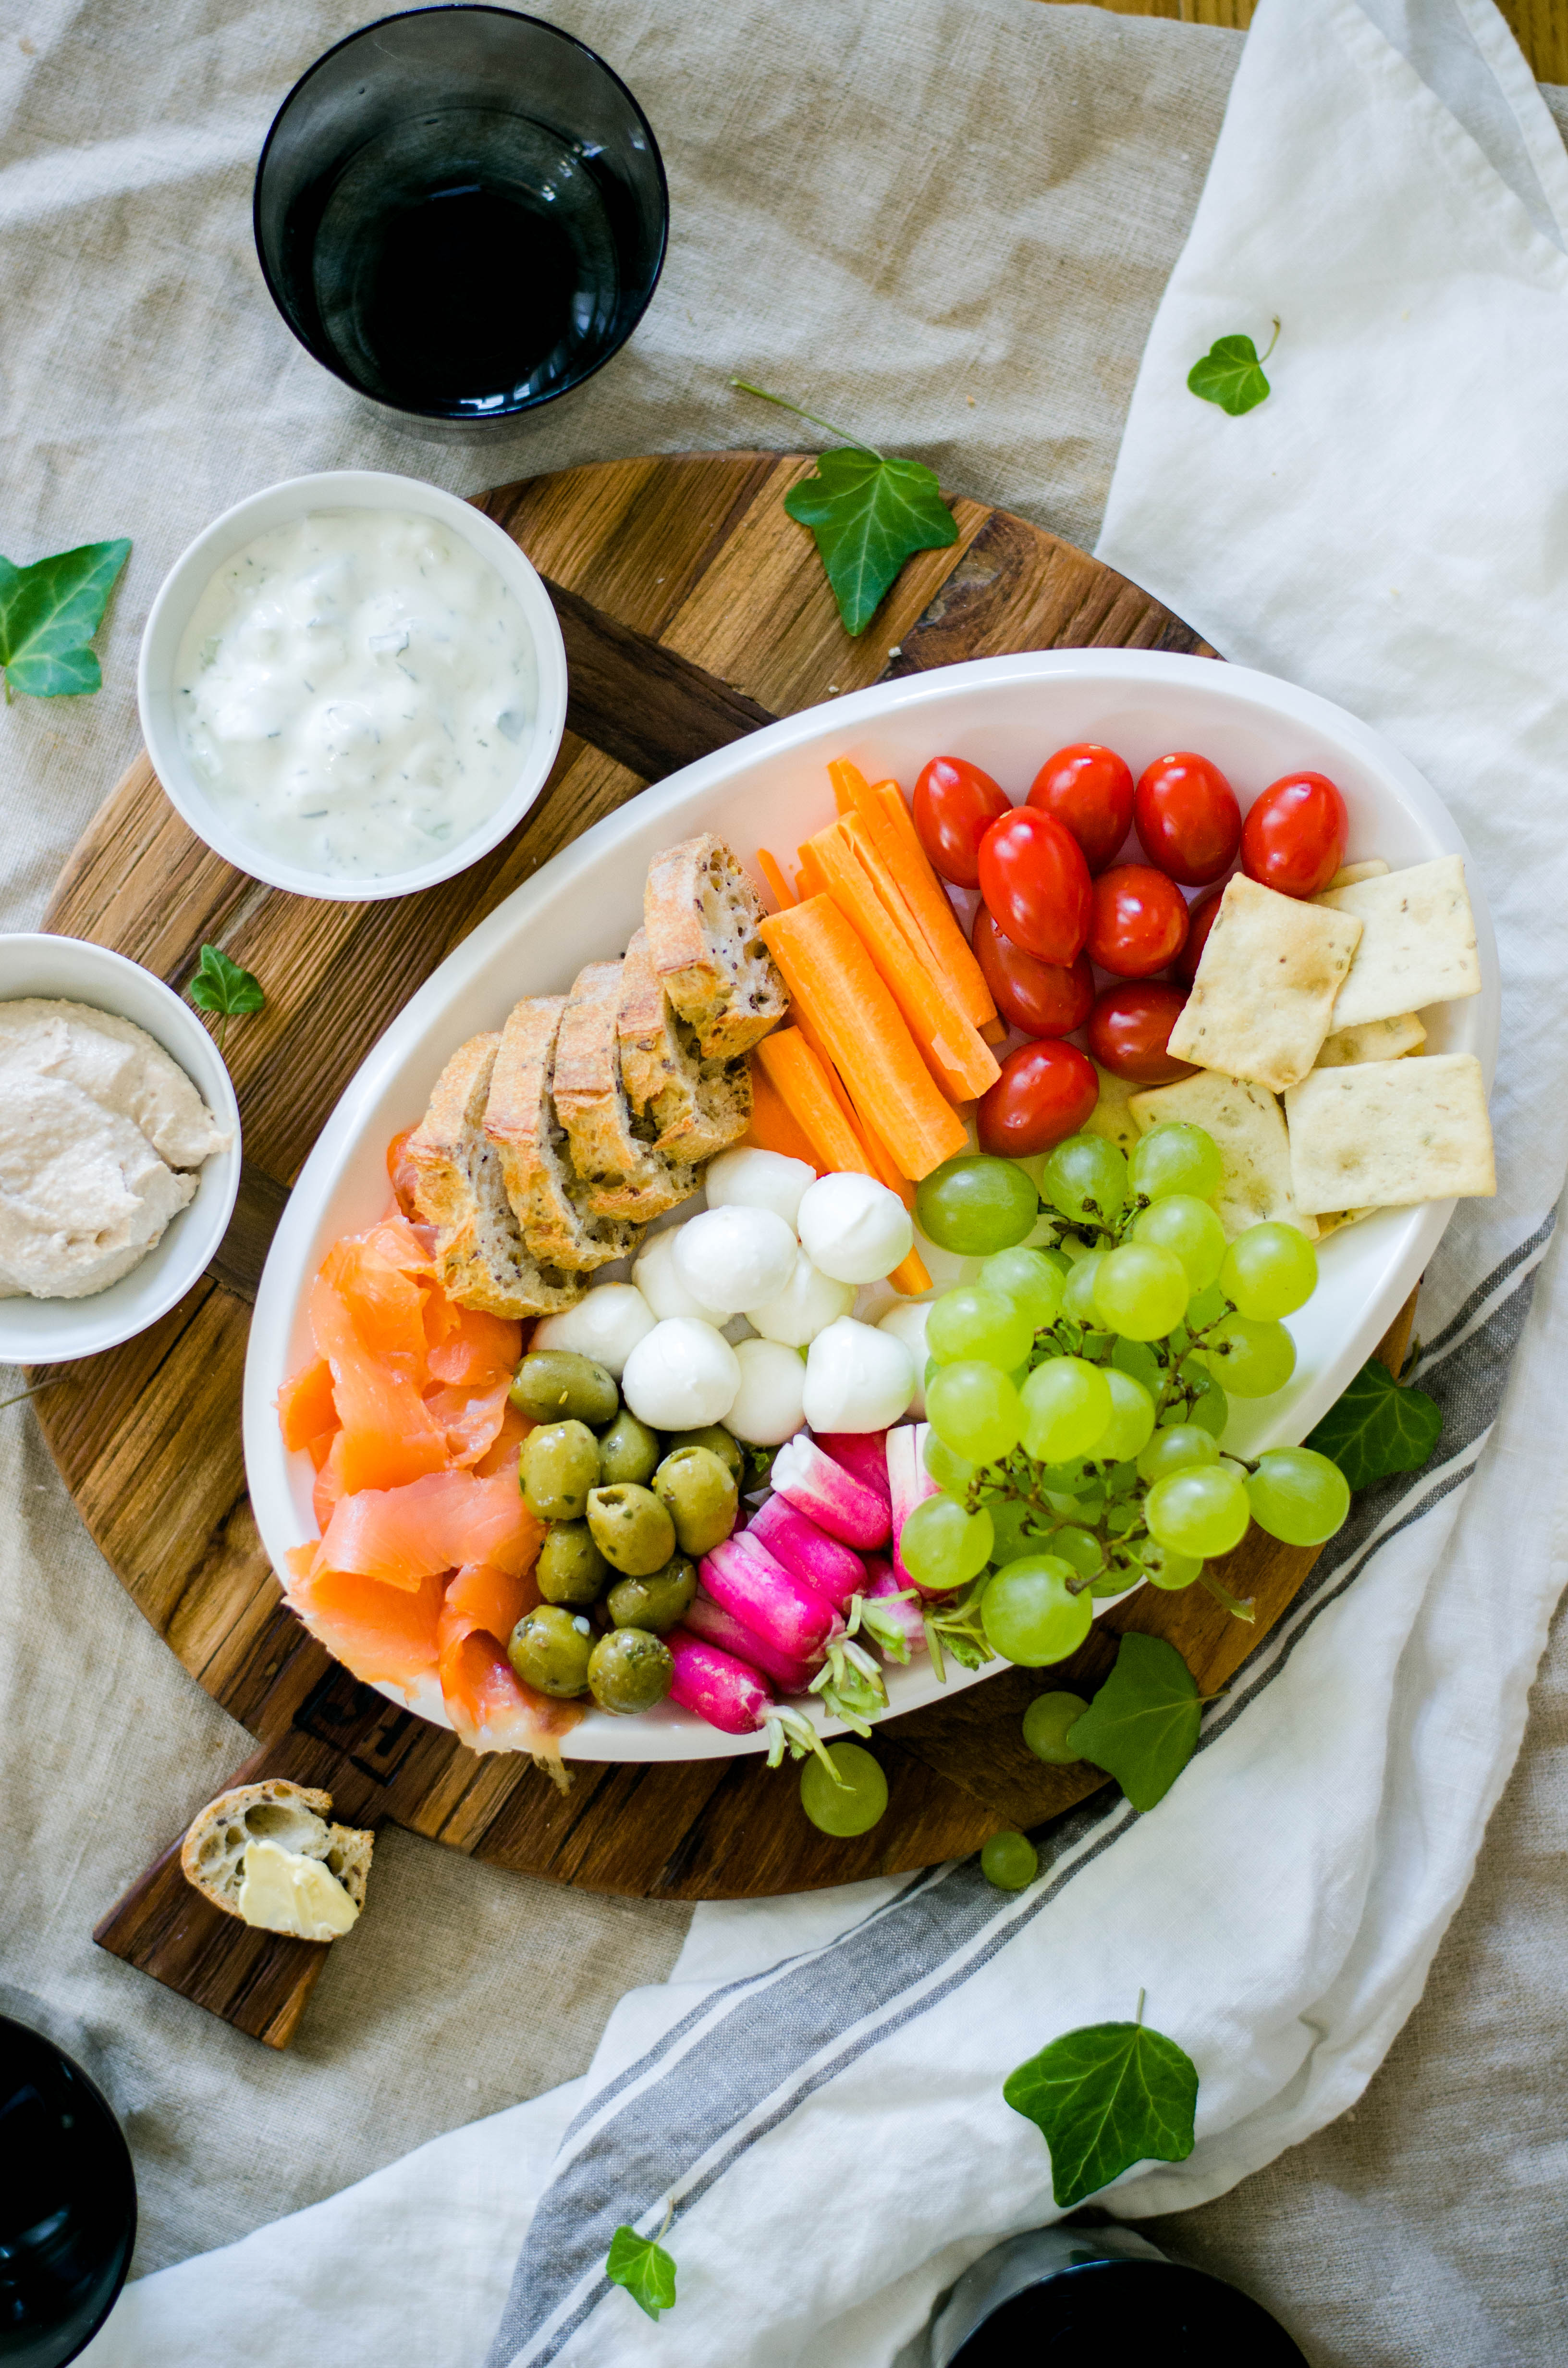 How to Make an Epic Healthy Grazing Platter